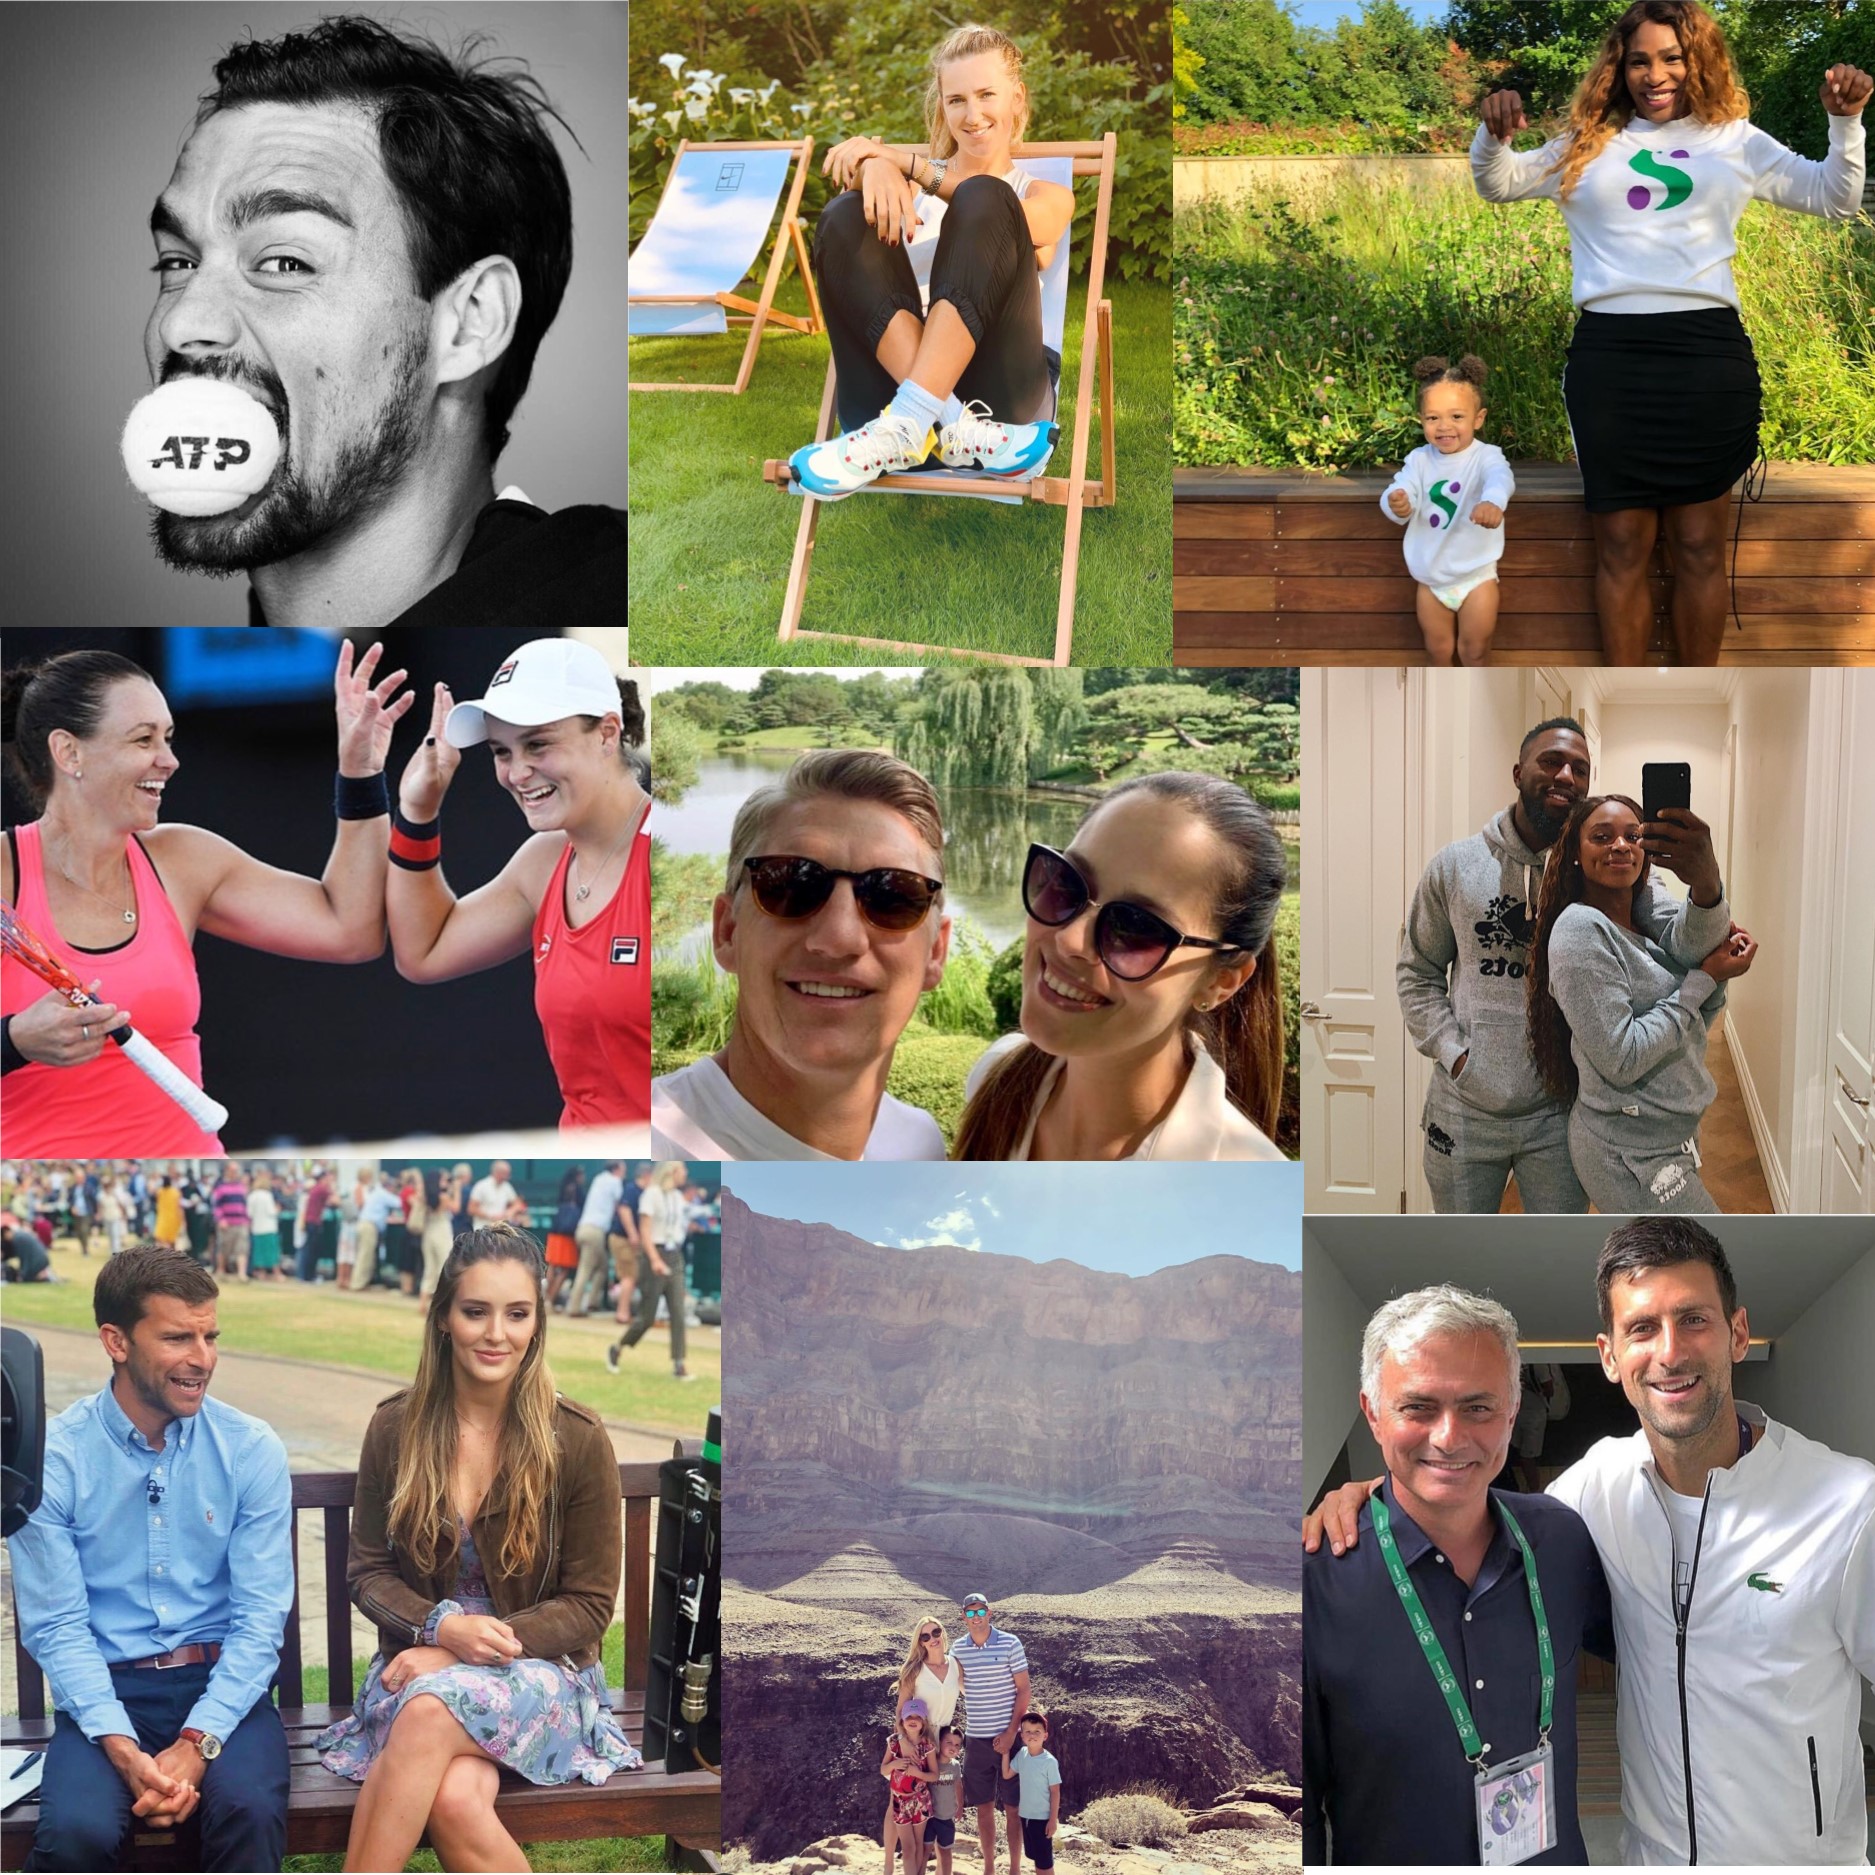 Top 10 Tennis Players to Follow On Instagram